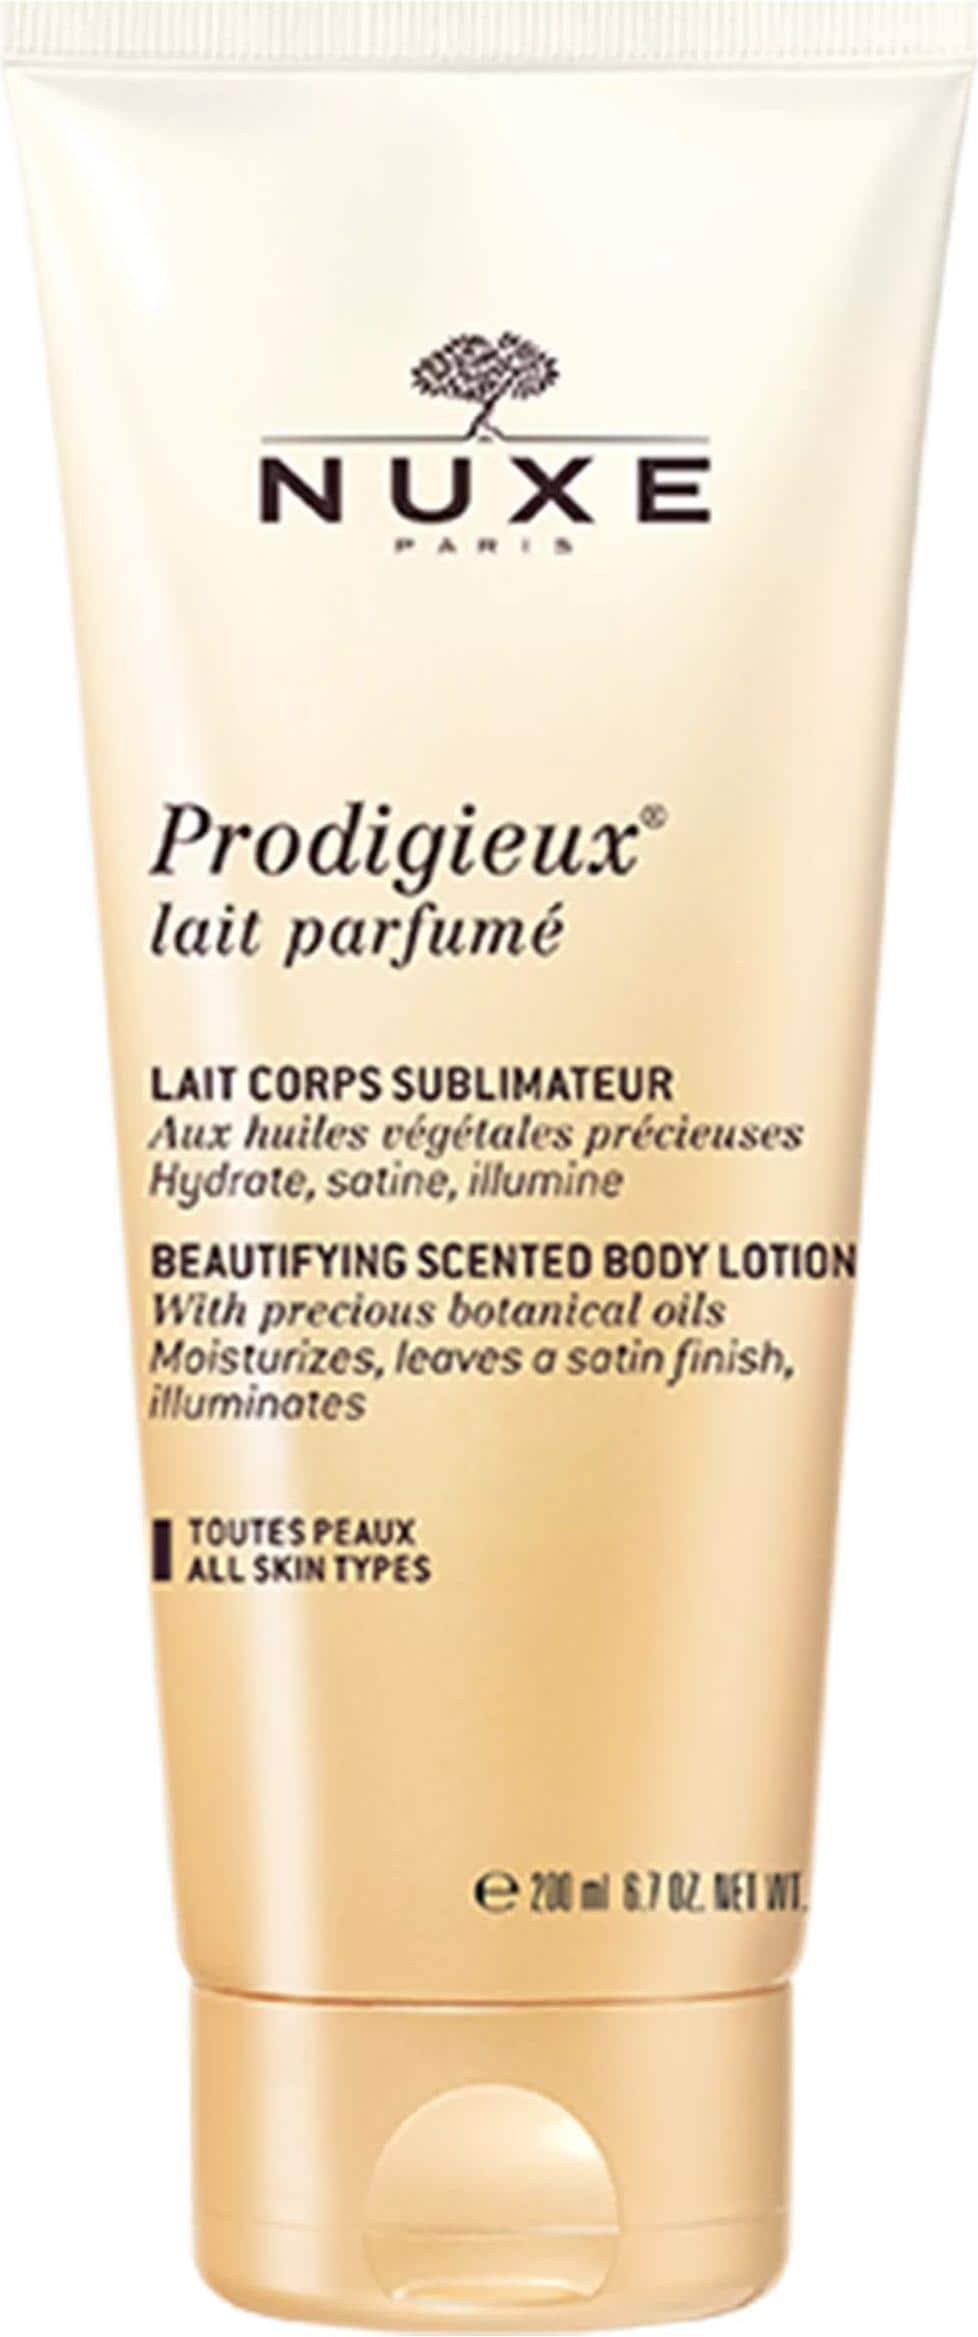 Nuxe Prodigieux Beautifying Scented Body Lotion - 200ml